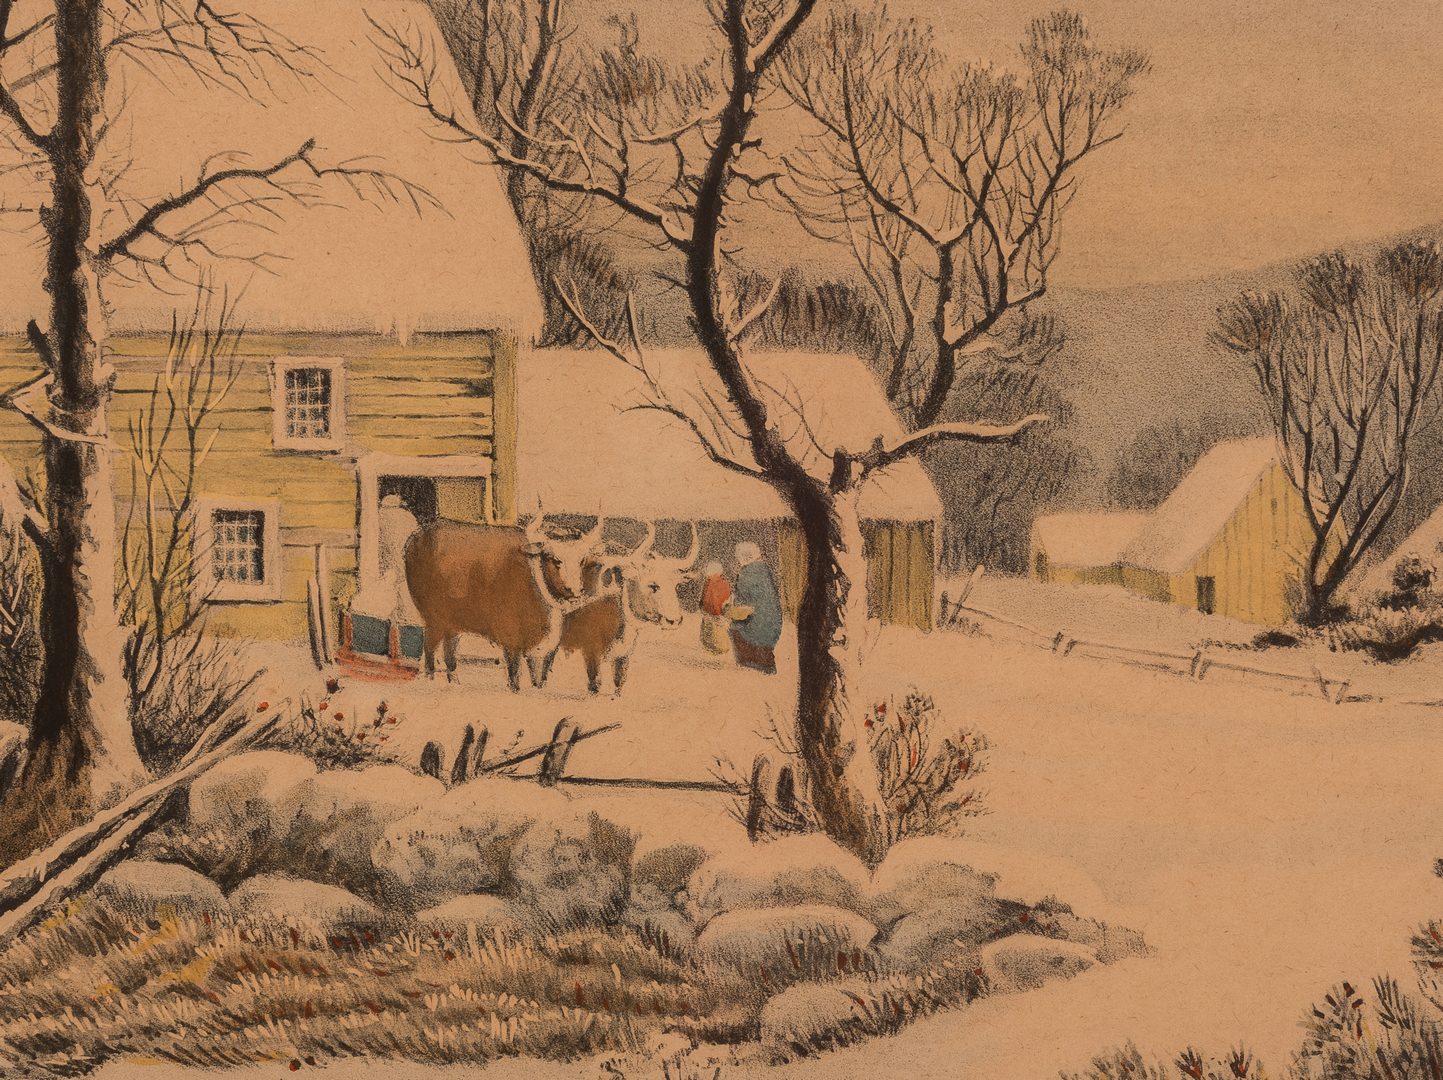 Lot 300: Currier and Ives, Winter in the Country, Grist Mill